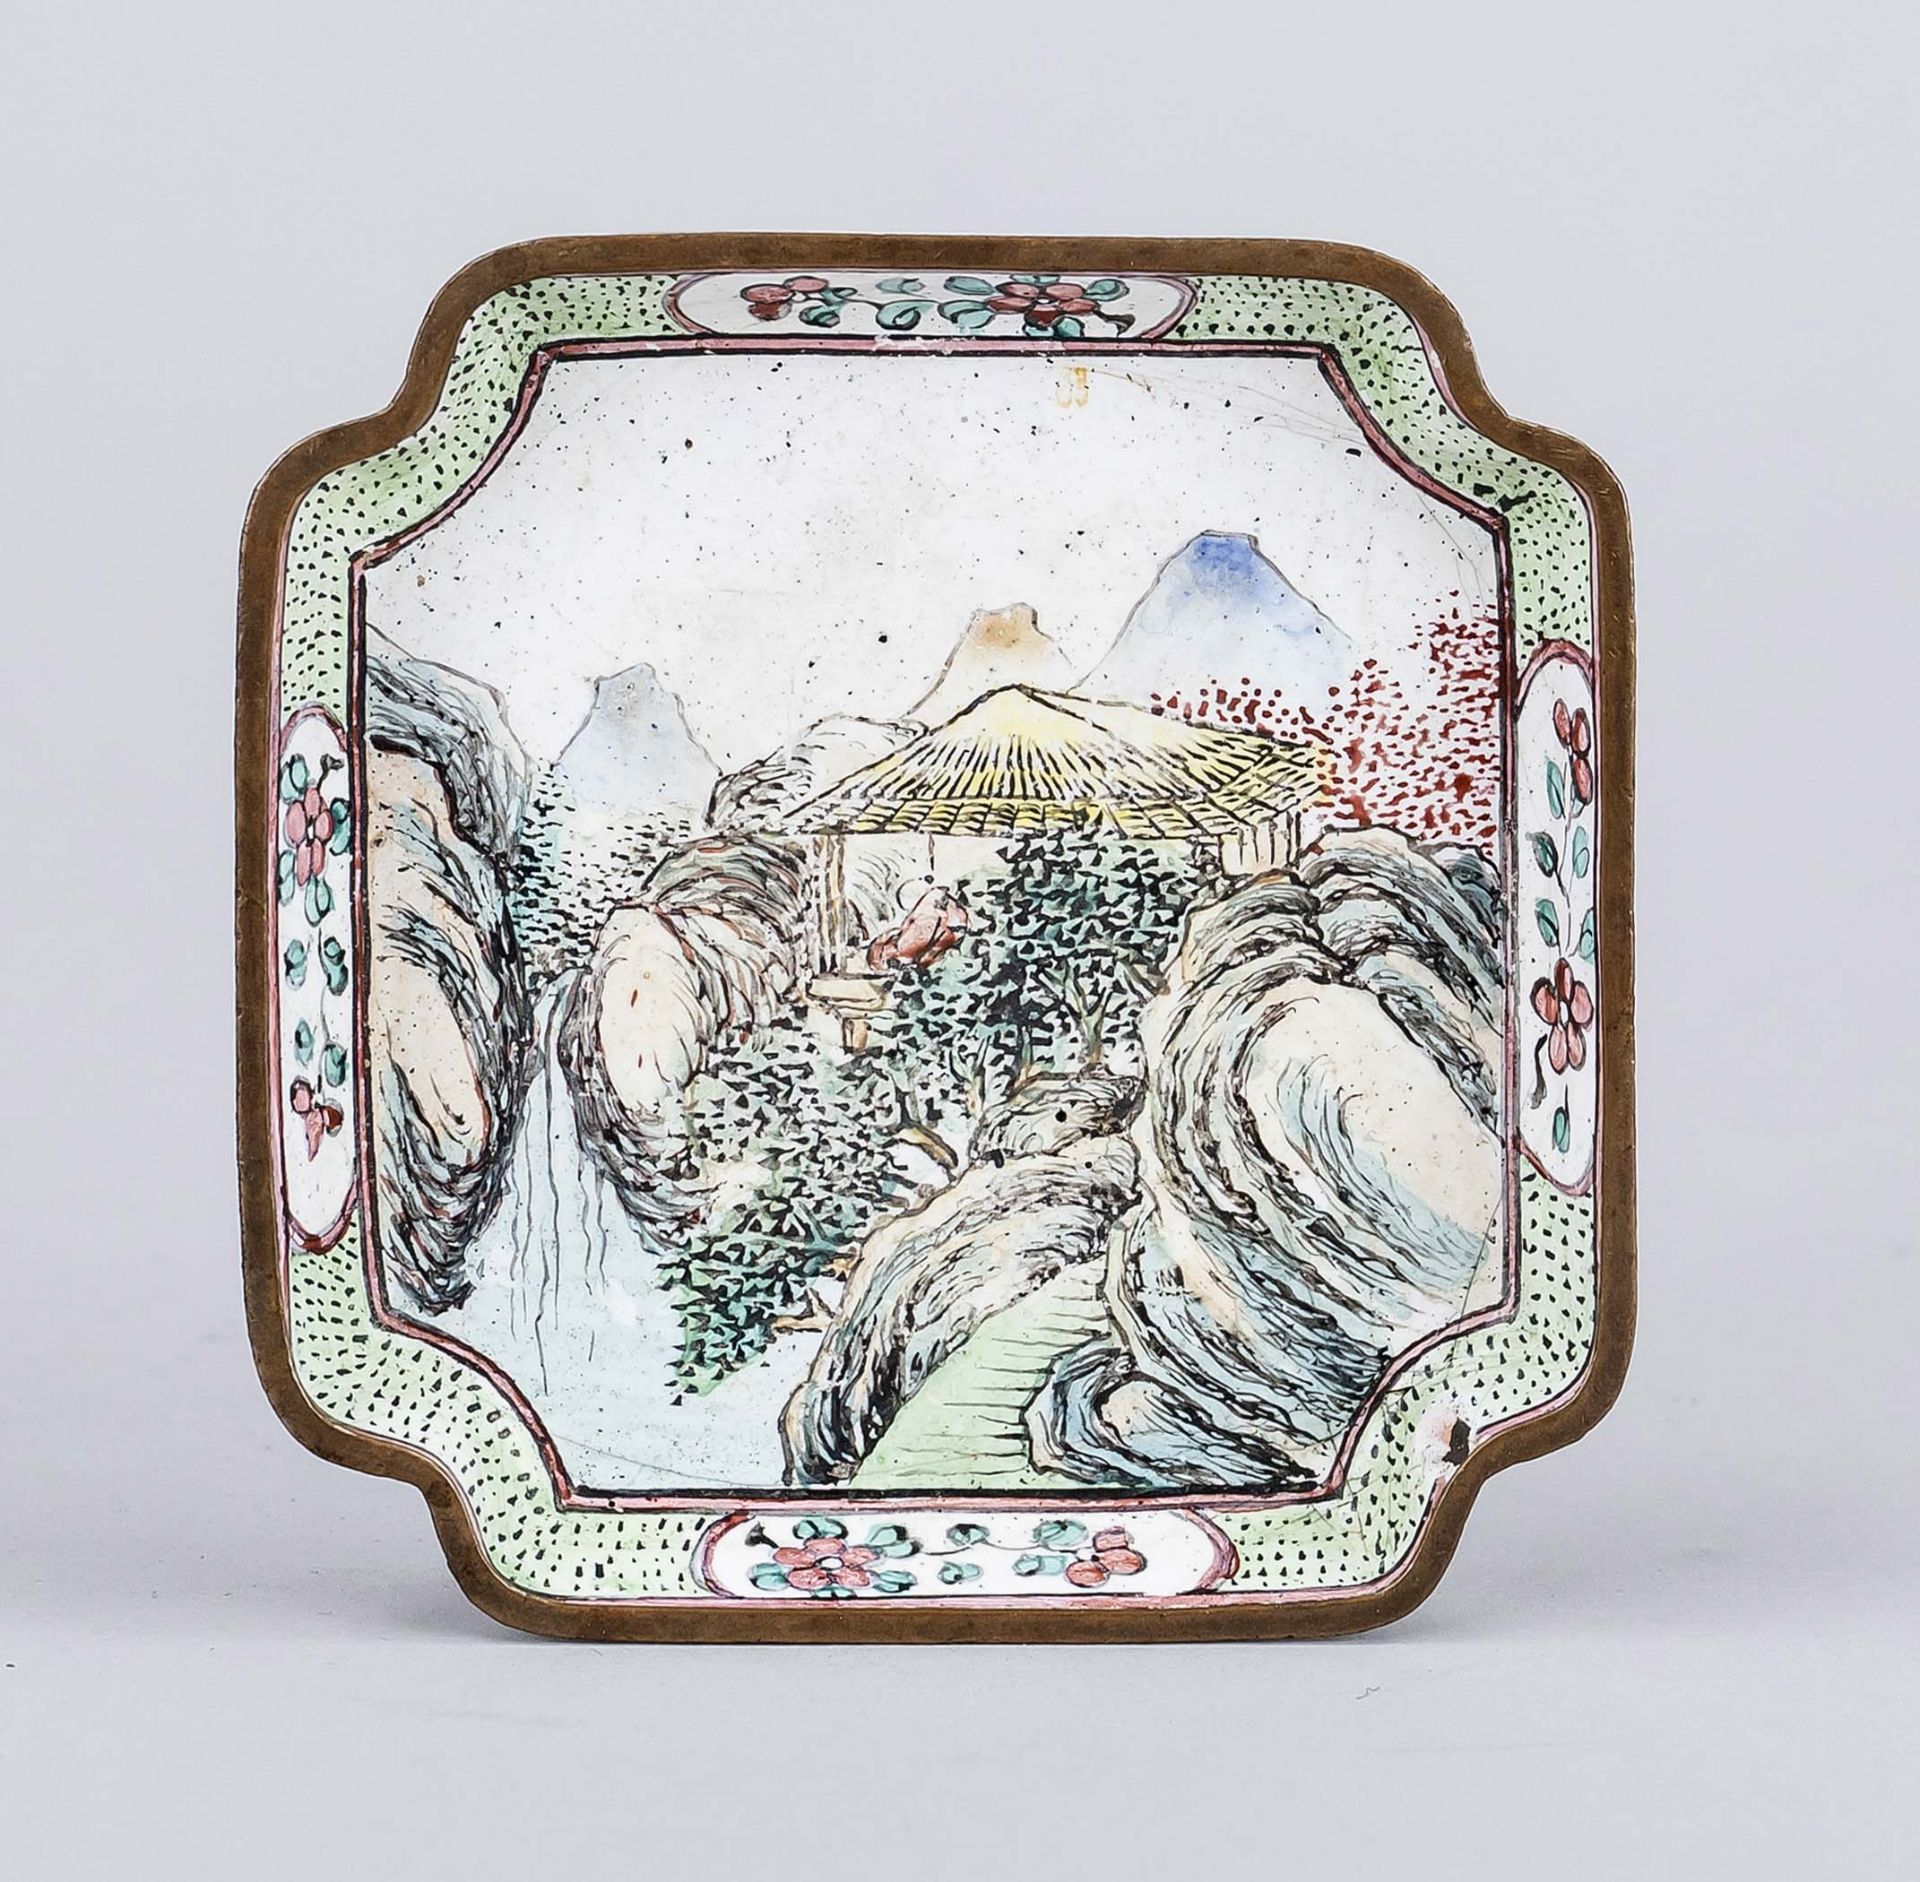 Small quatrefoil enamel bowl, China (Canton), late 19th century, the mirror with an idealized